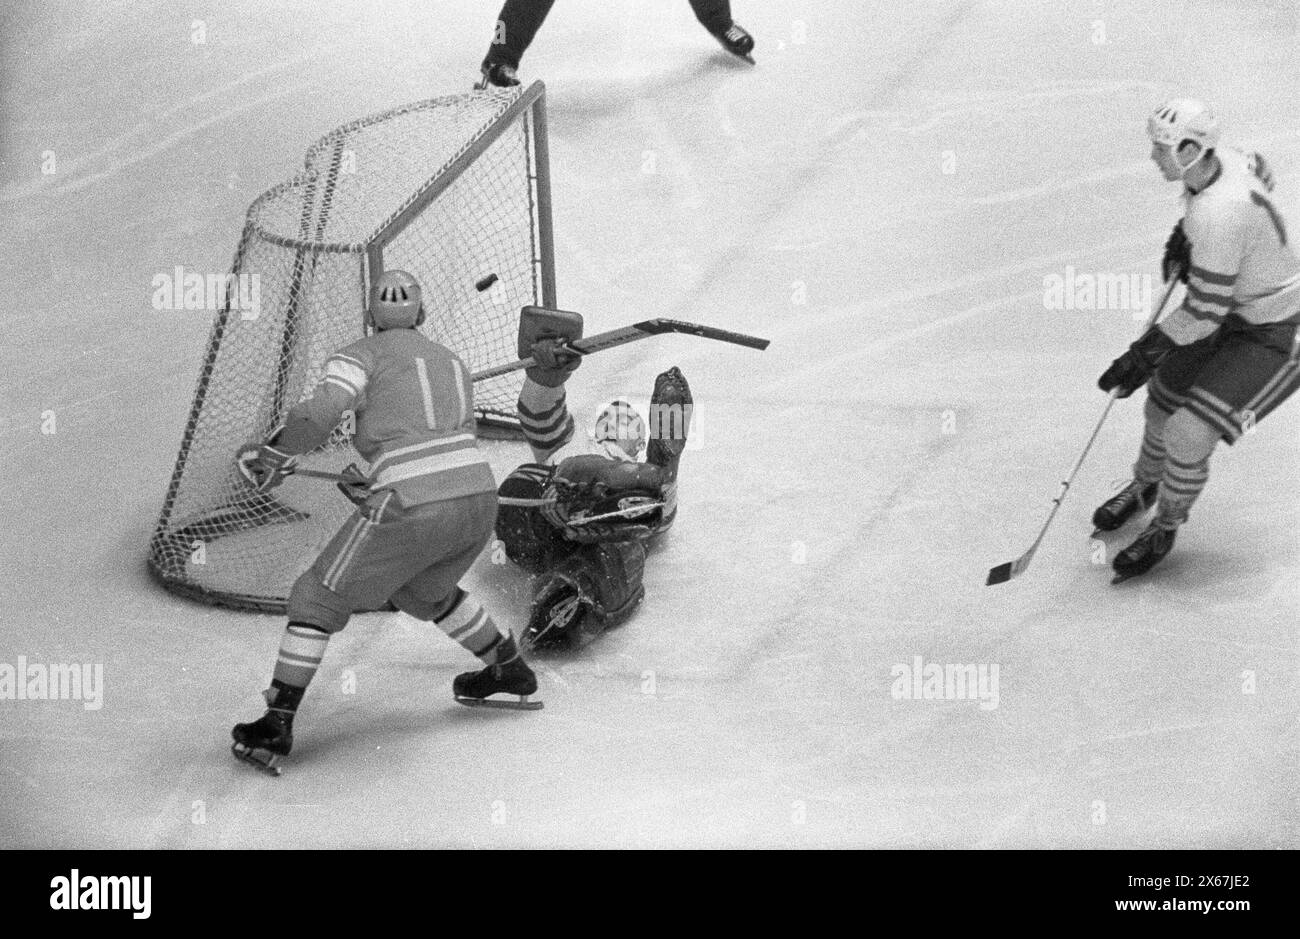 Vintage Winter Olympics Games Photo: Grenoble 68, Ice hockey competition.   USSR v Sweden 3-2, Anatoly Firsov (USSR) scores, Swedish goalie unable to make the save, February 13, 1968, Stock Photo